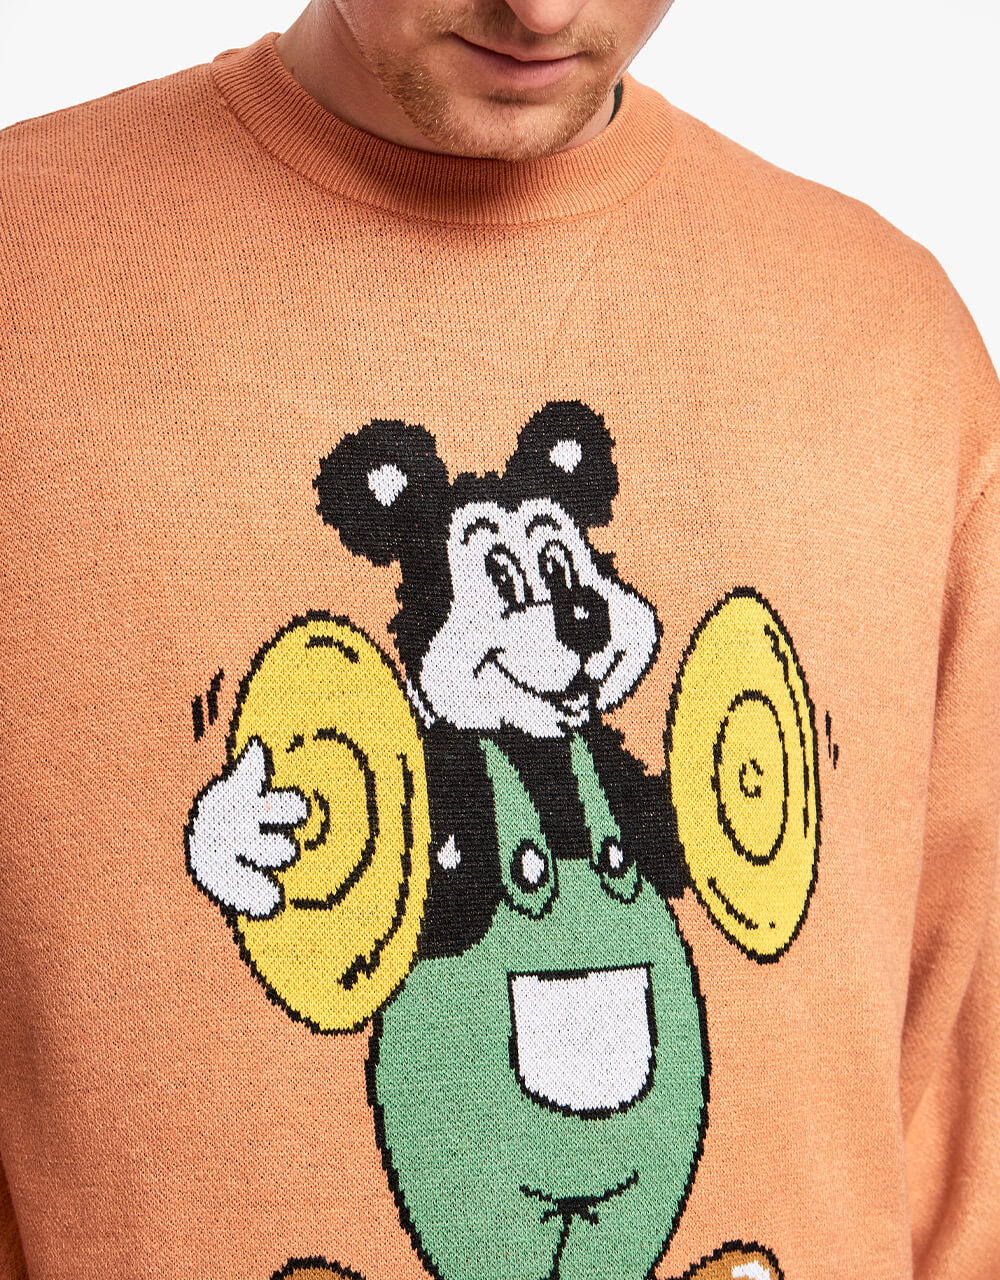 Butter Goods Cymbals Knit Sweater - Washed Peach